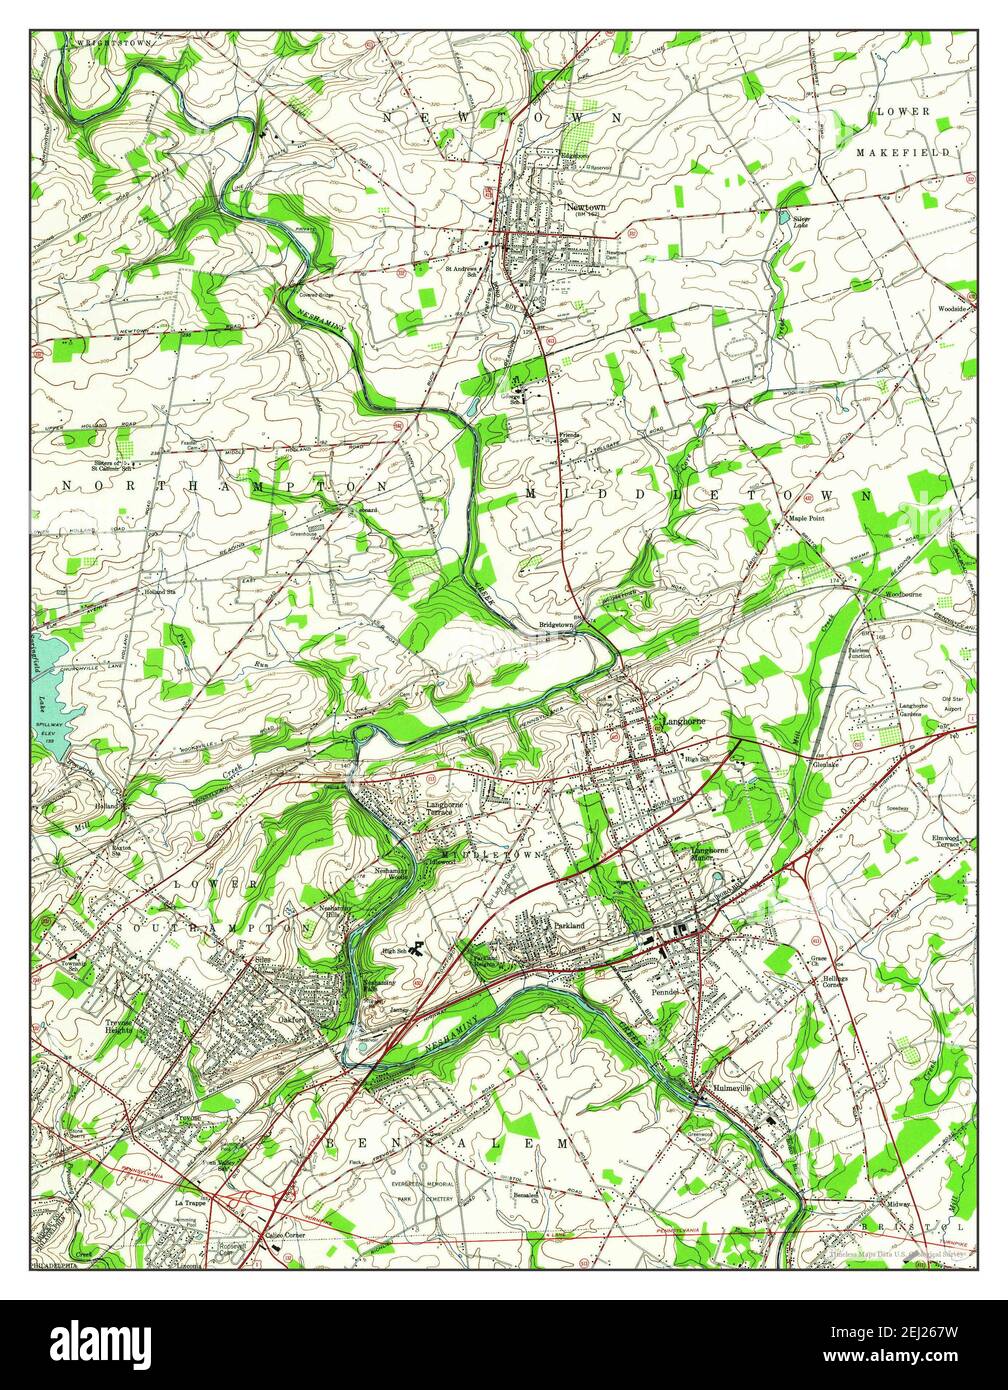 Langhorne, Pennsylvania, map 1953, 1:24000, United States of America by Timeless Maps, data U.S. Geological Survey Stock Photo